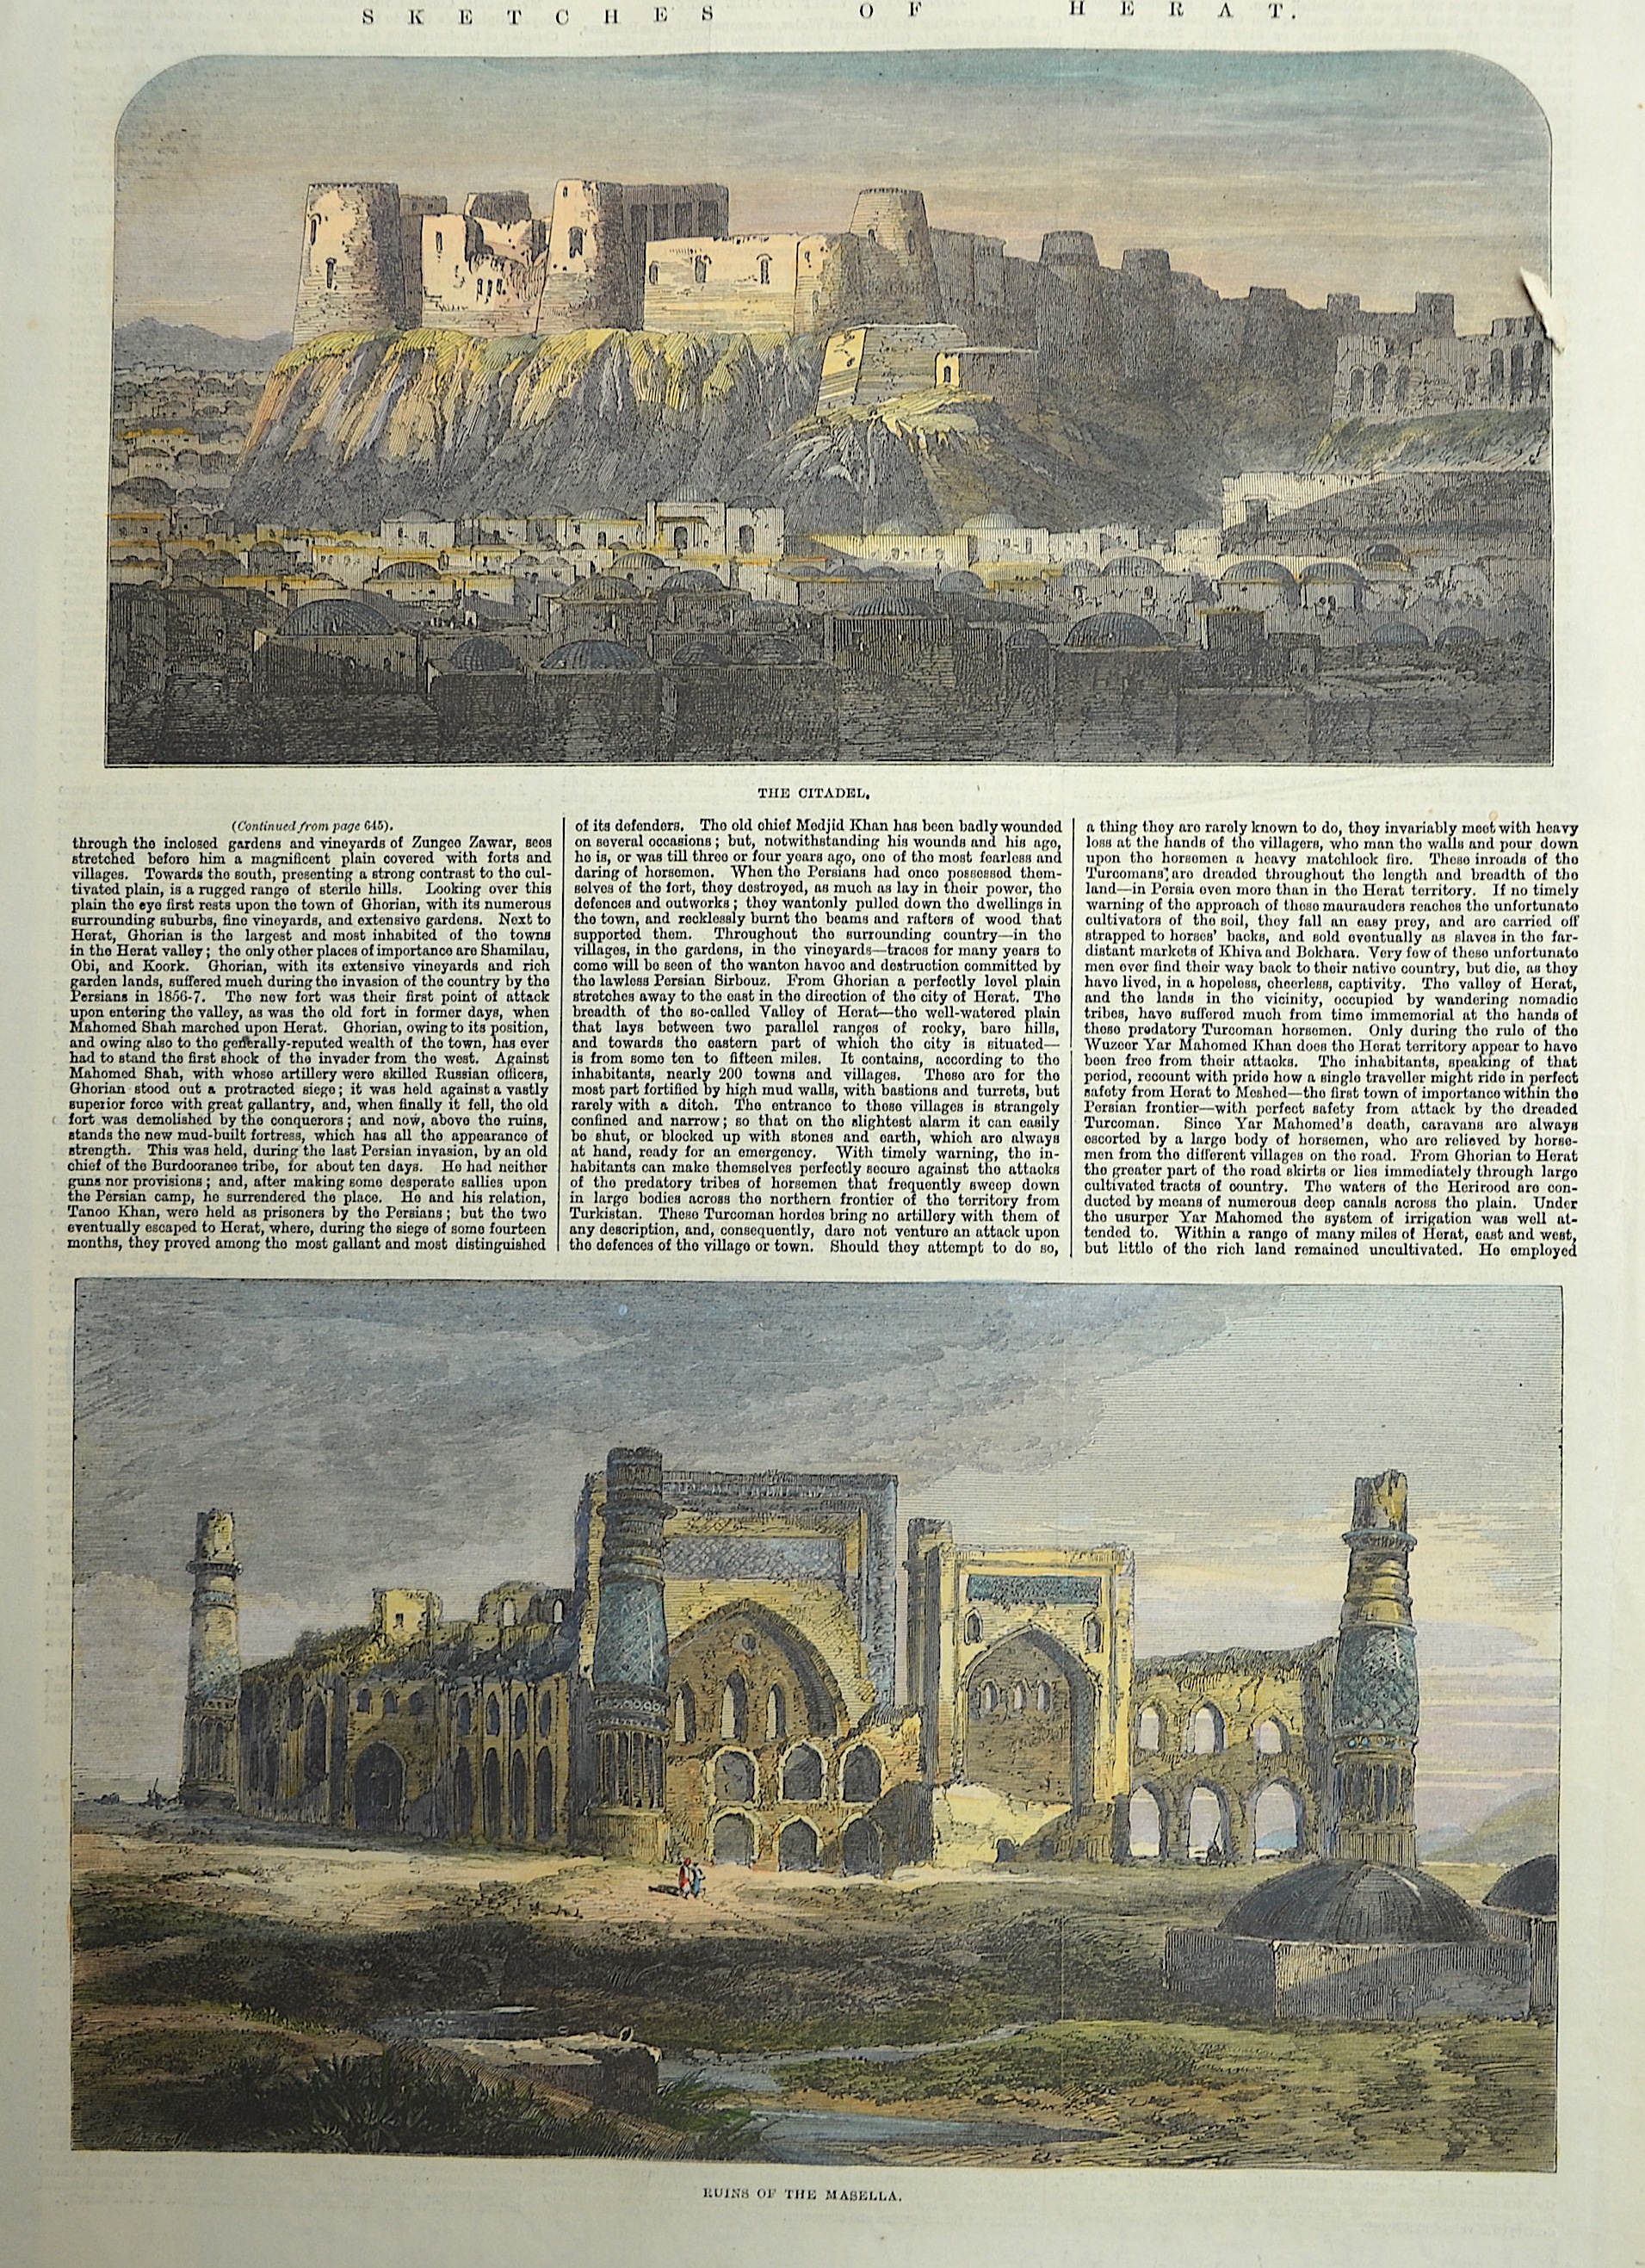 Anonymus  Sketches of Herat. / The Citadel. / Ruins of the Masella.